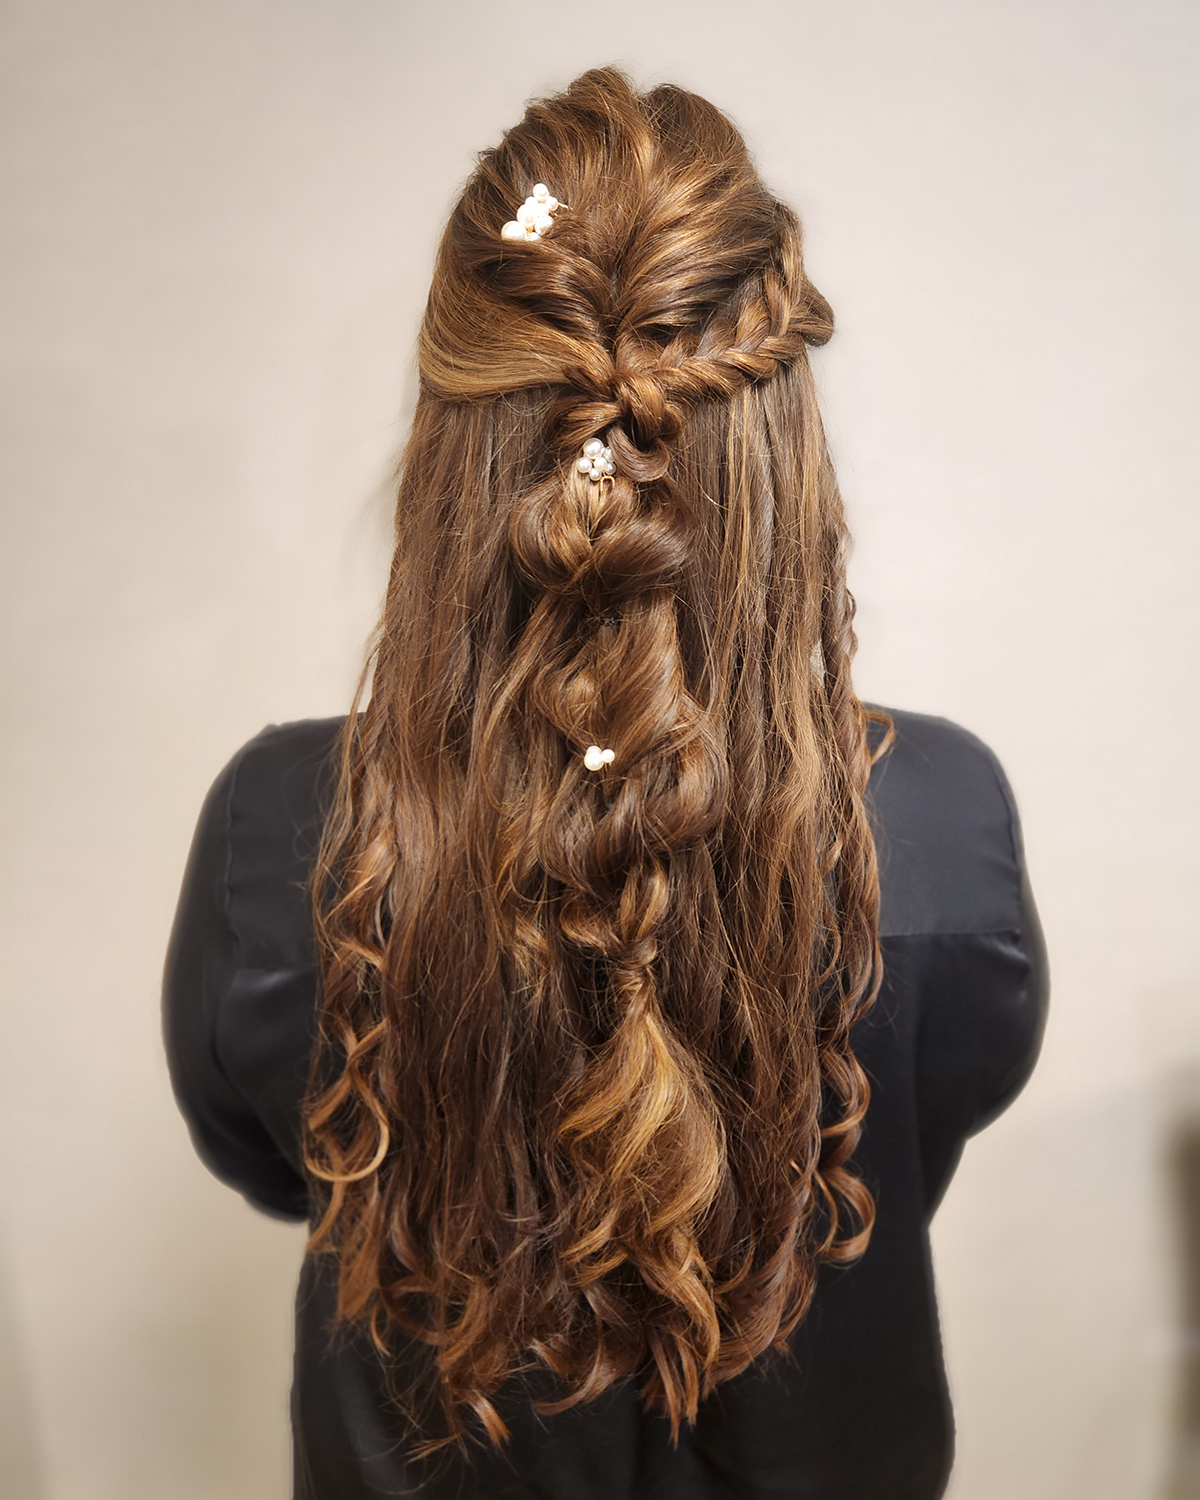 long sandy coloured hair with braids and curls